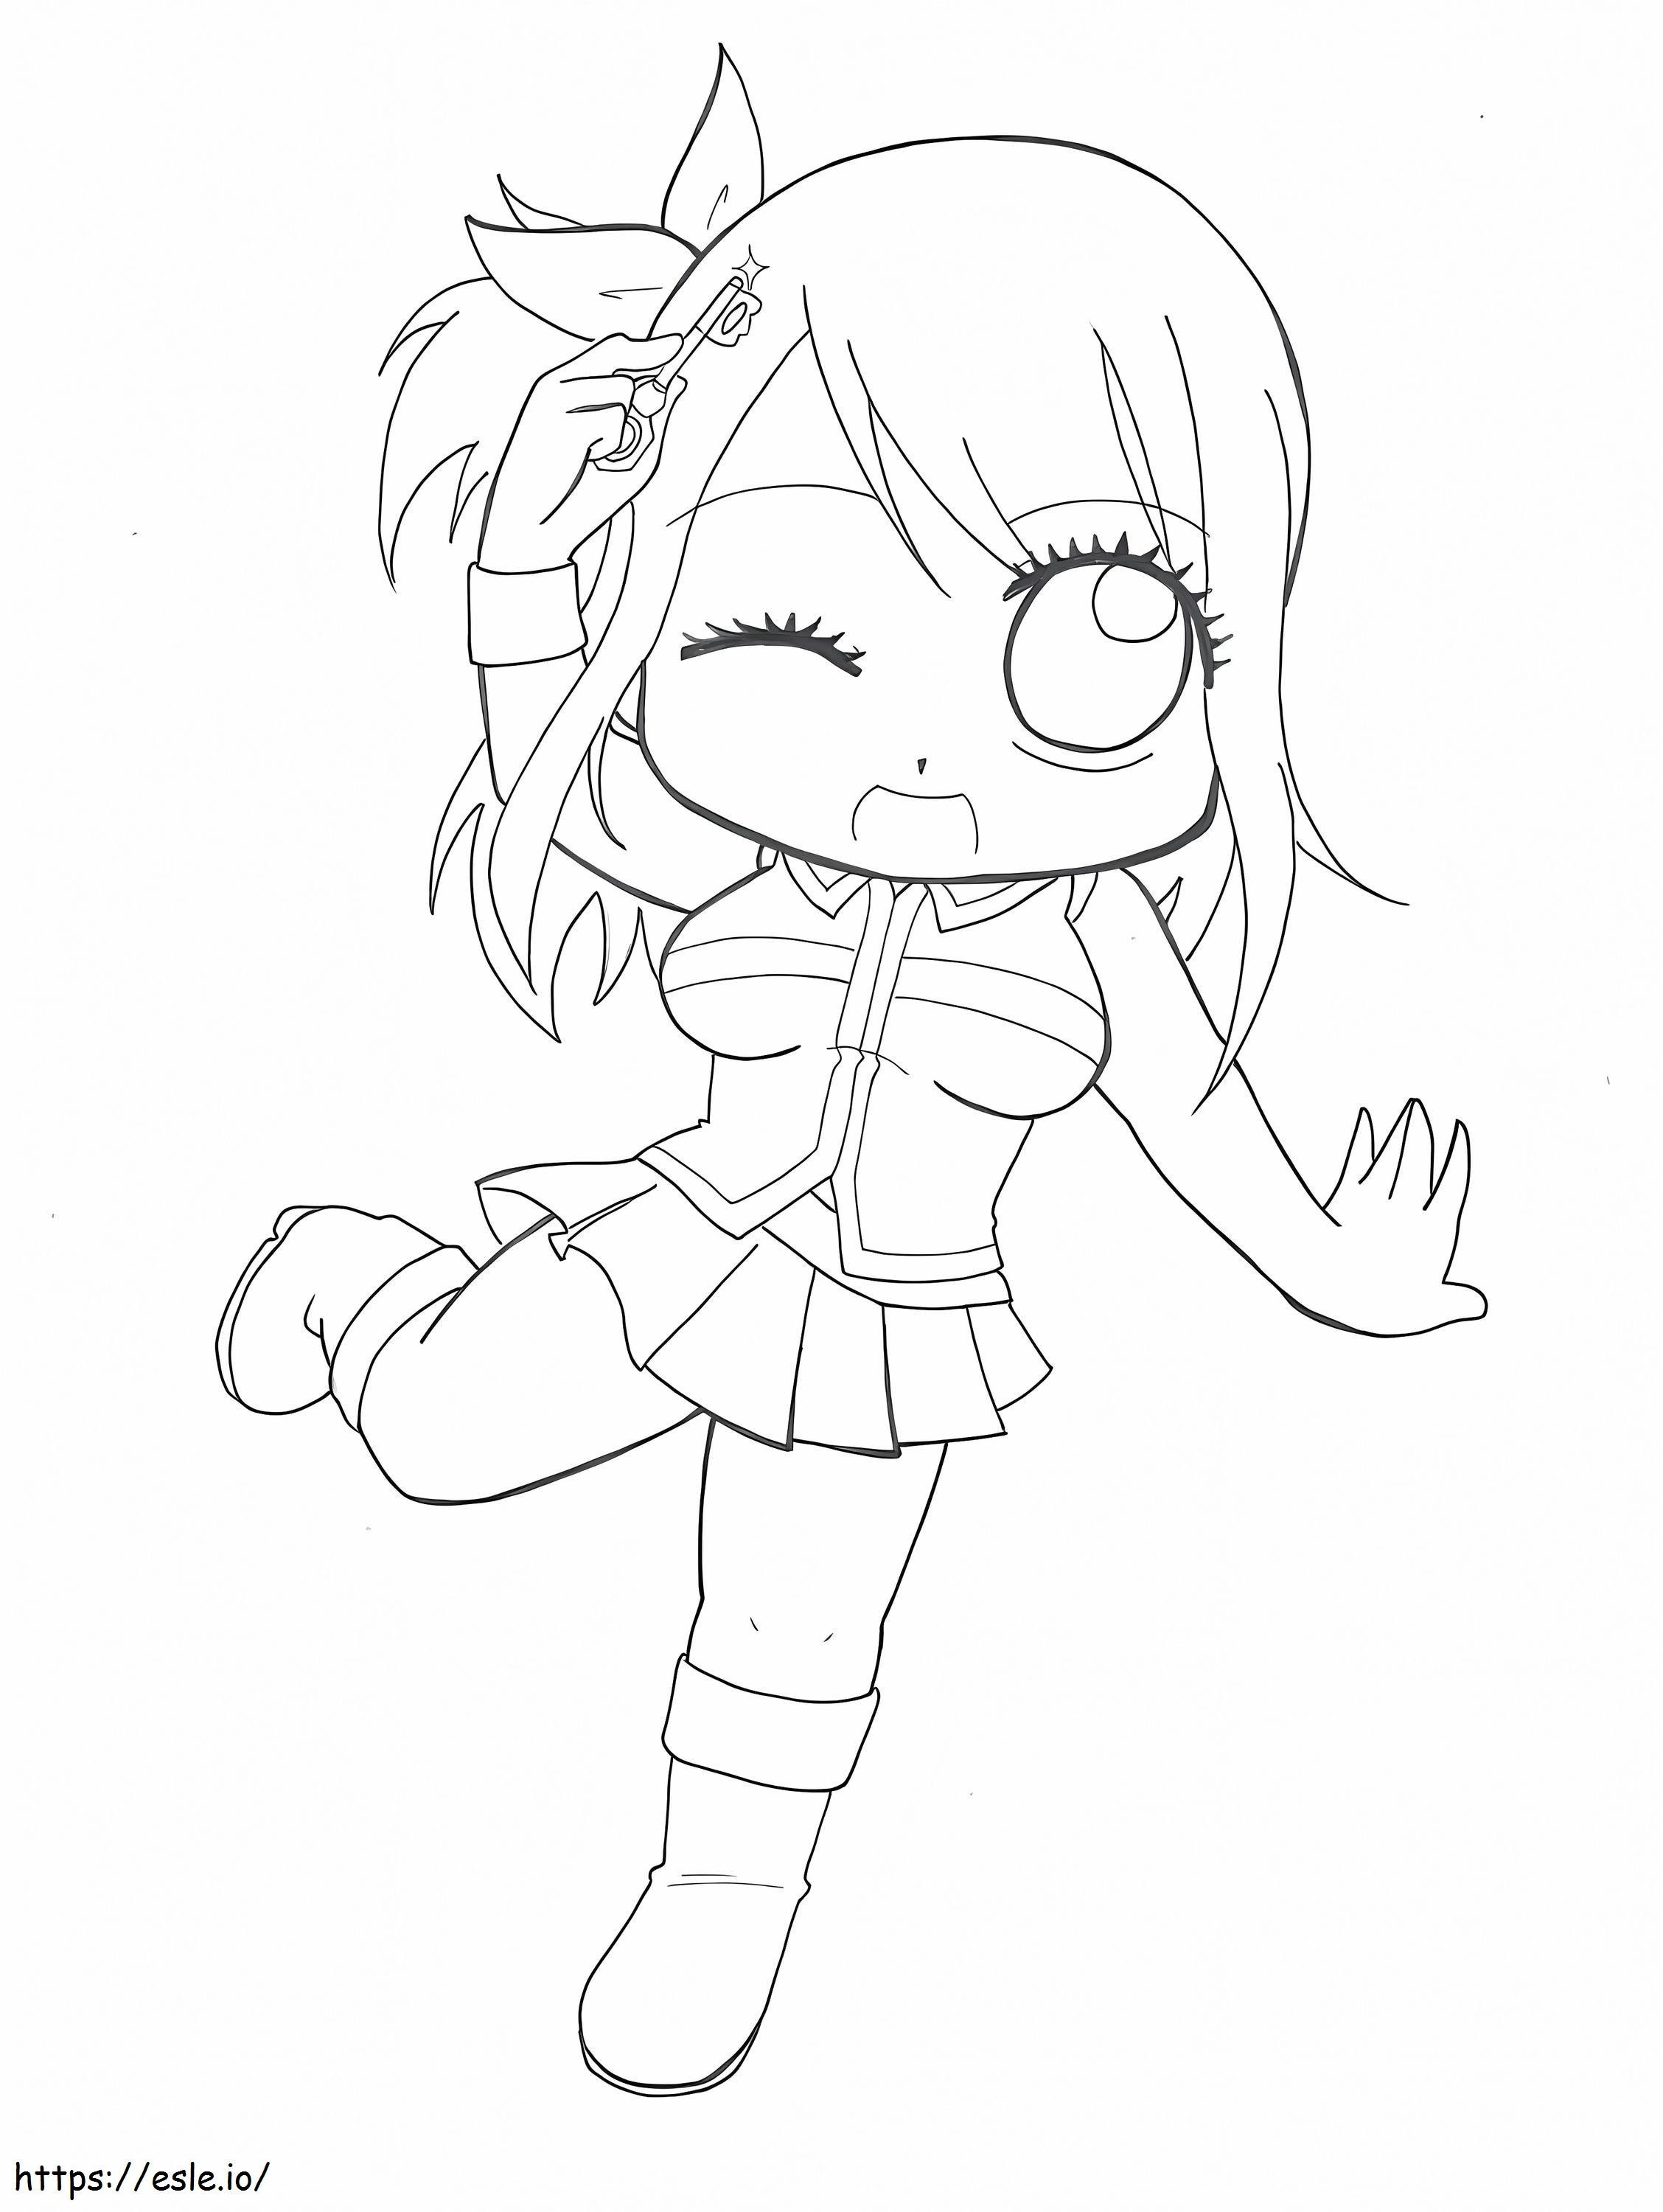 Chibi Lucy Heartfilia 1 coloring page